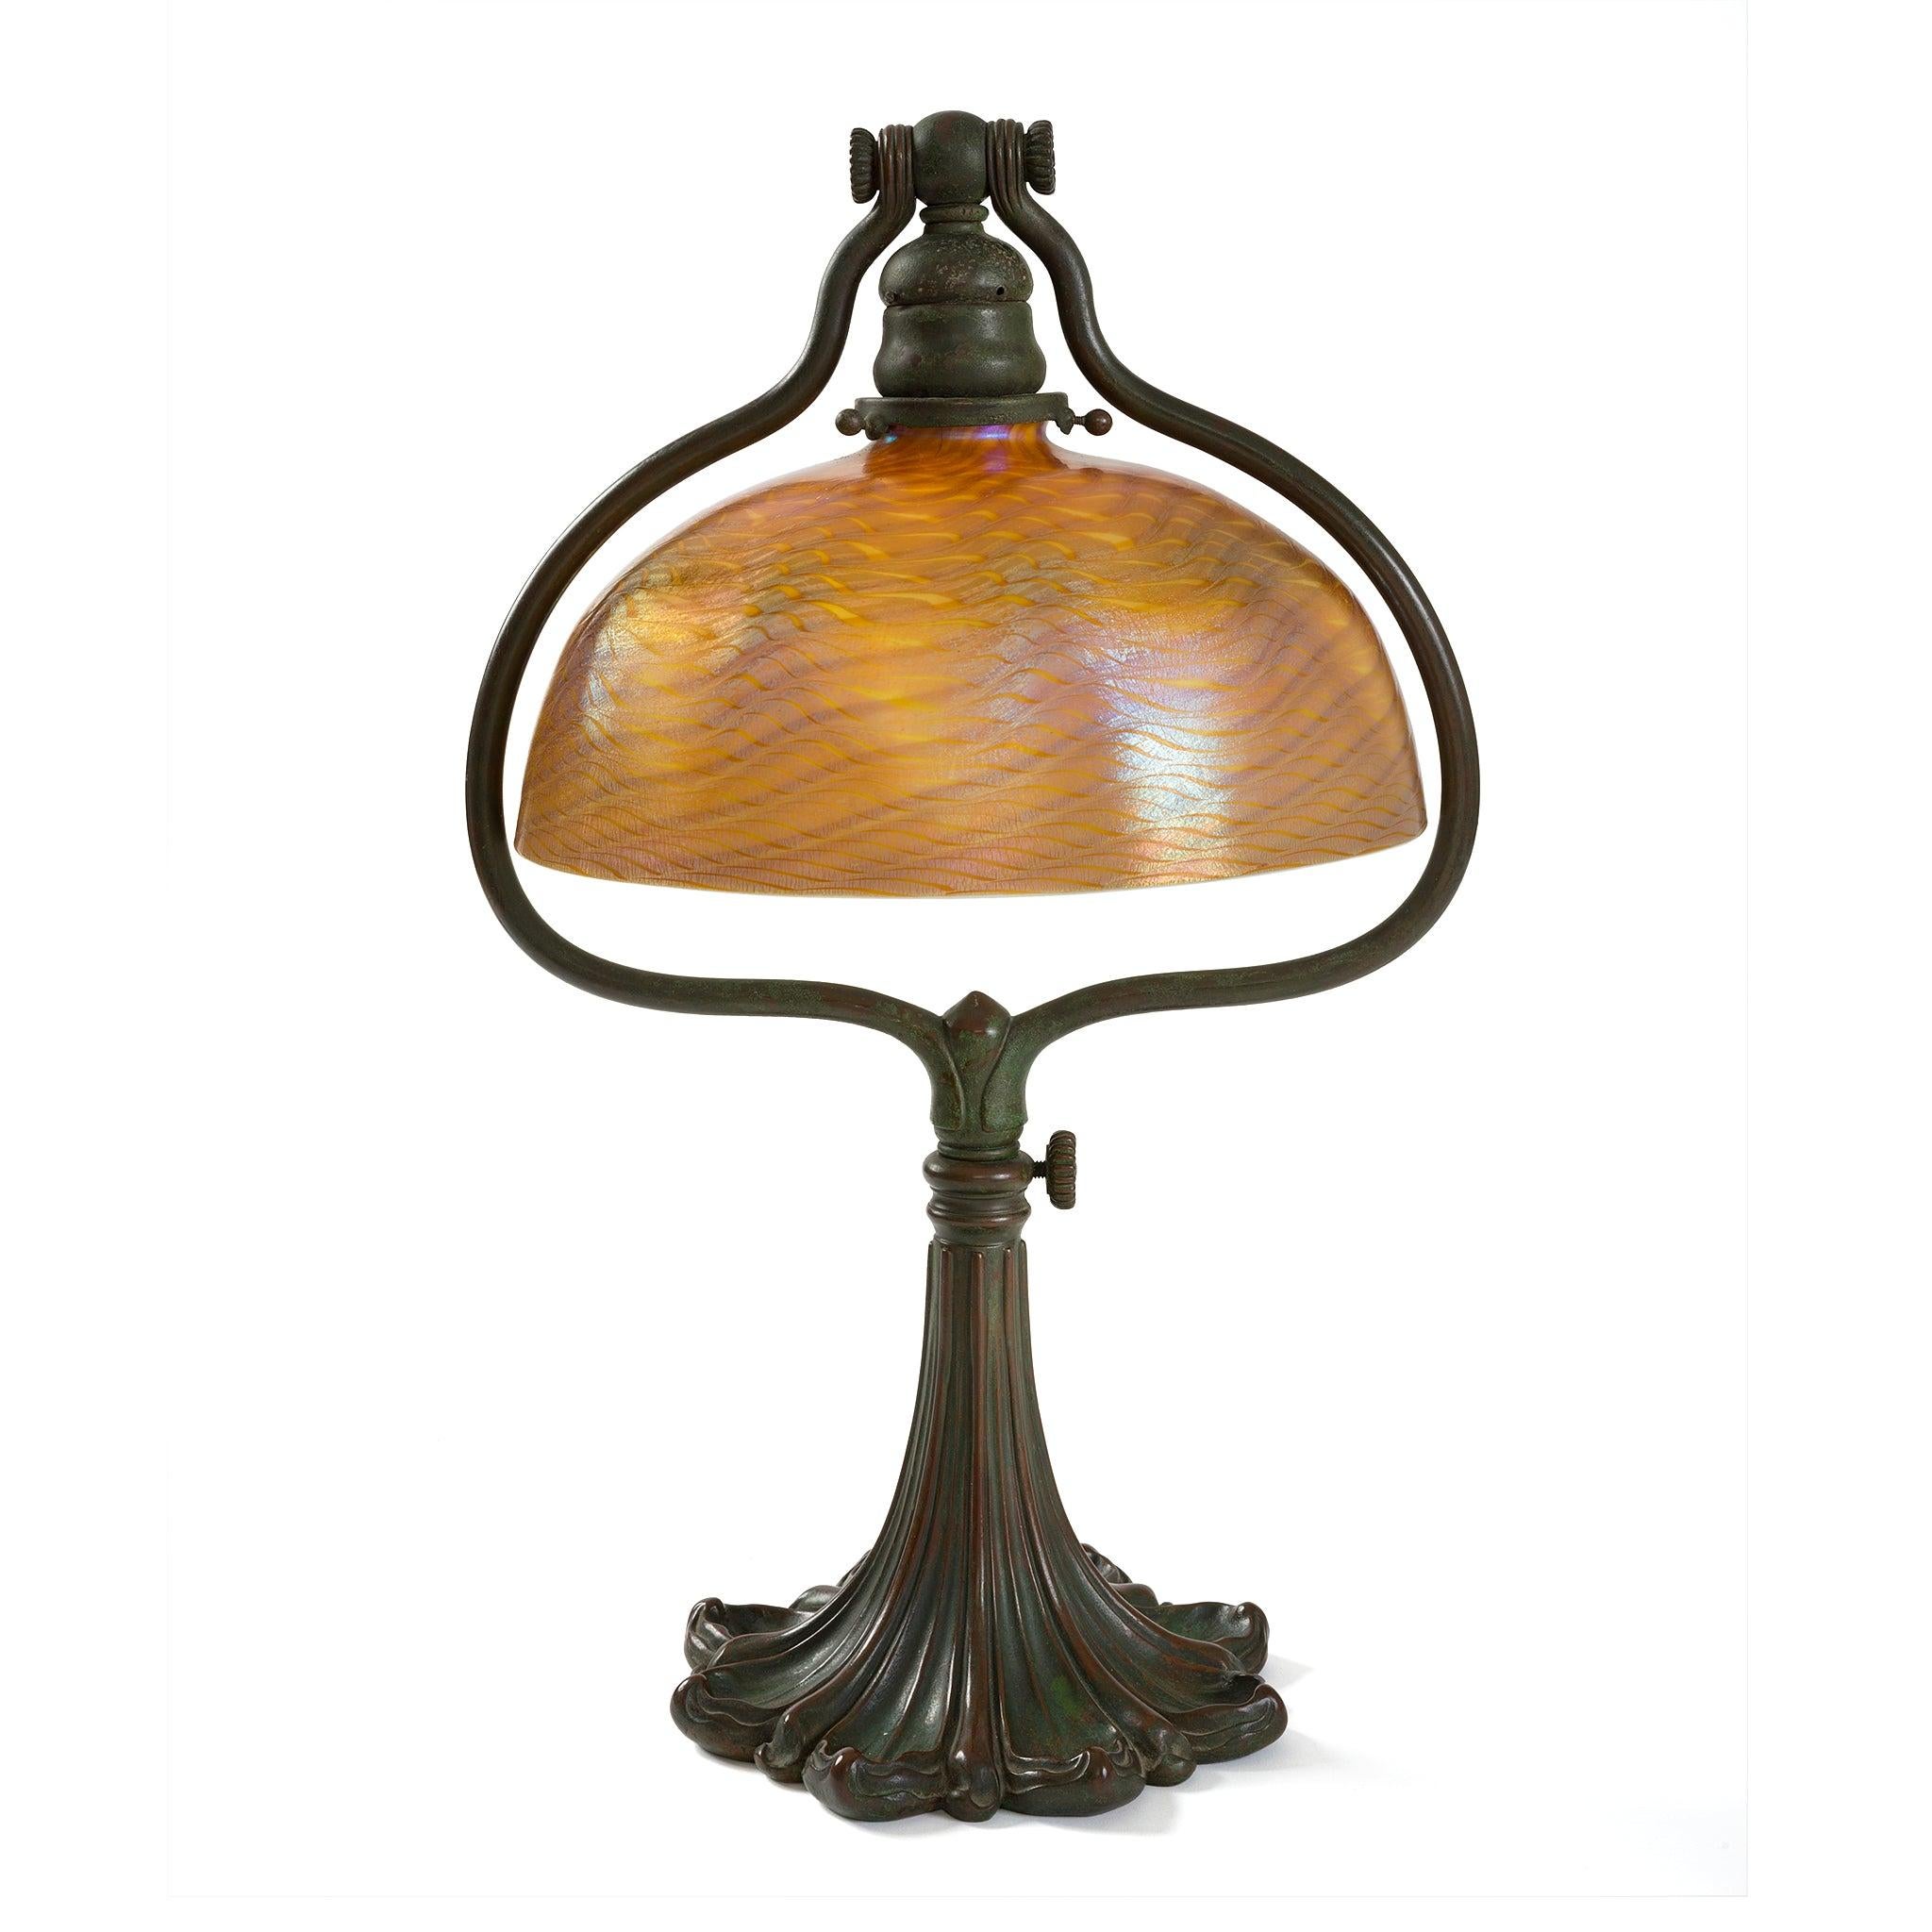 This desk lamp by Tiffany Studios, dating from circa 1910, features a damascene favrile glass shade on an adjustable patinated bronze harp base. With dichroic amber-golden and green tones, the subtly iridescent shade is suspended from an adjustable